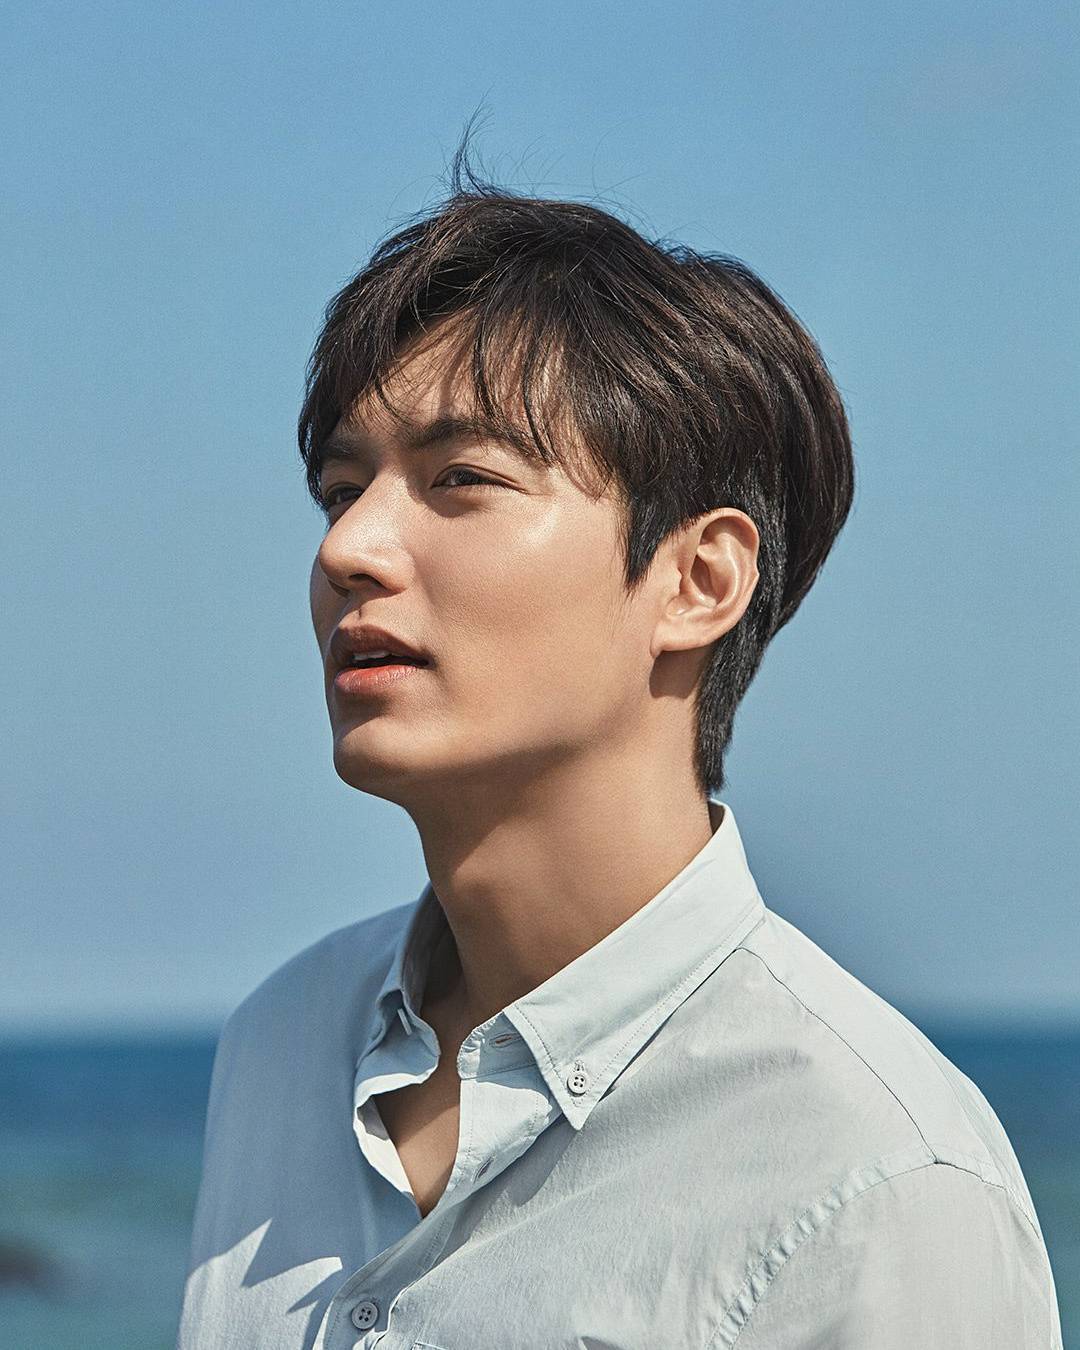 Lee Min Ho to Play The Lead Role for AppleTV+'s 